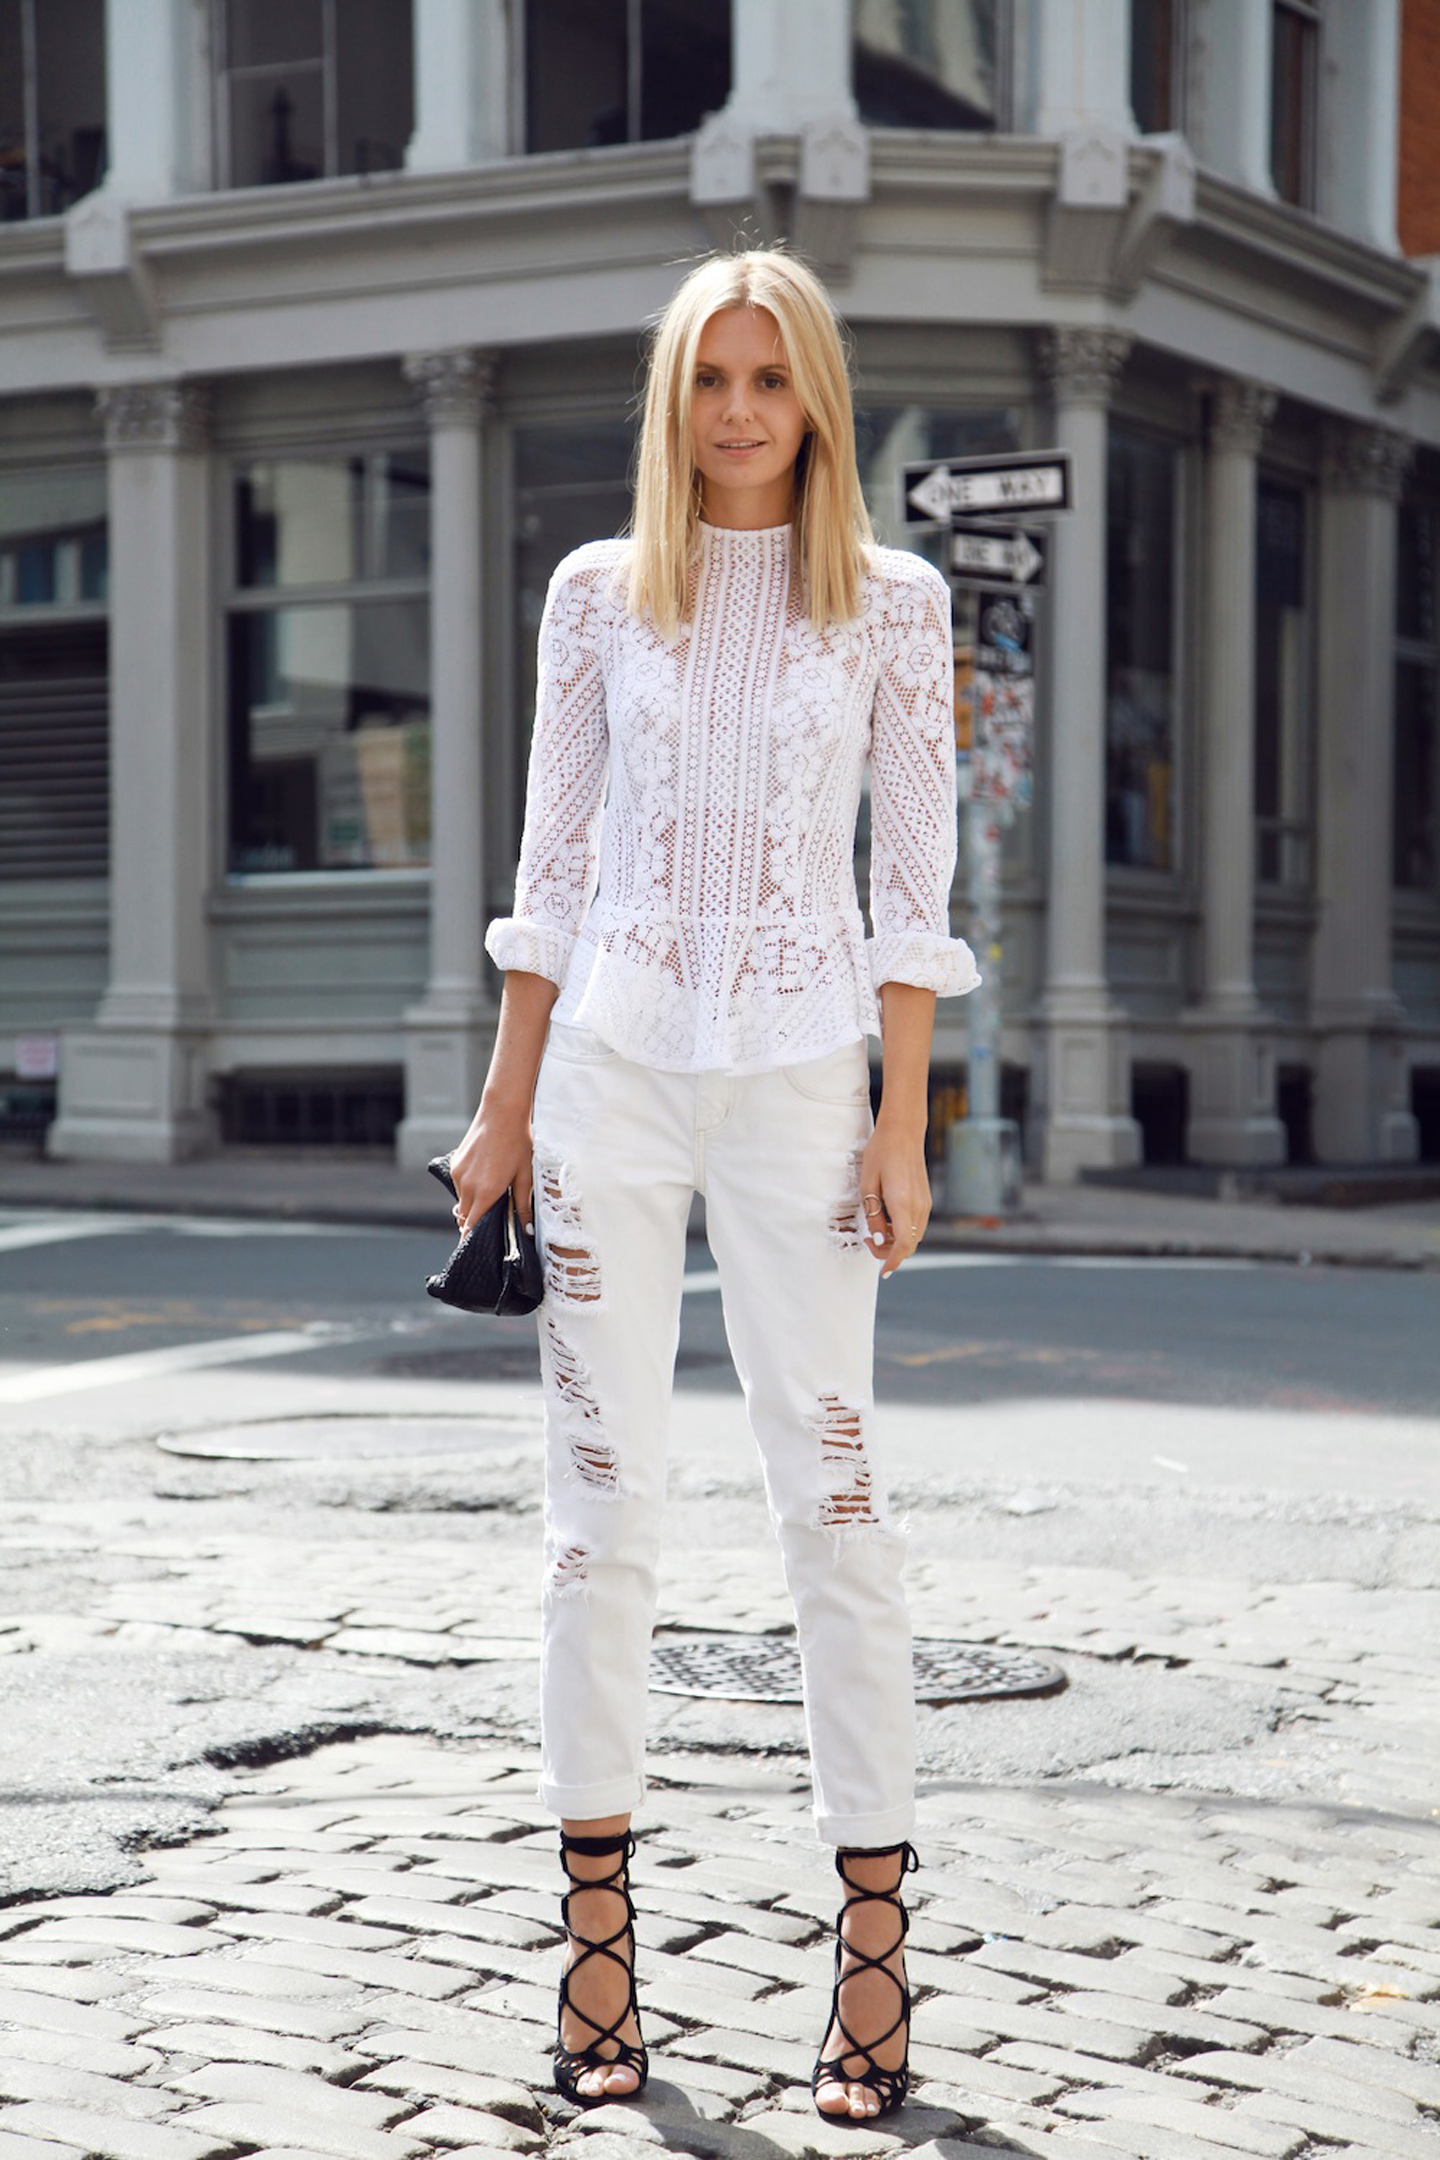 Lace It Up: Use Lace For Your Daily Combination